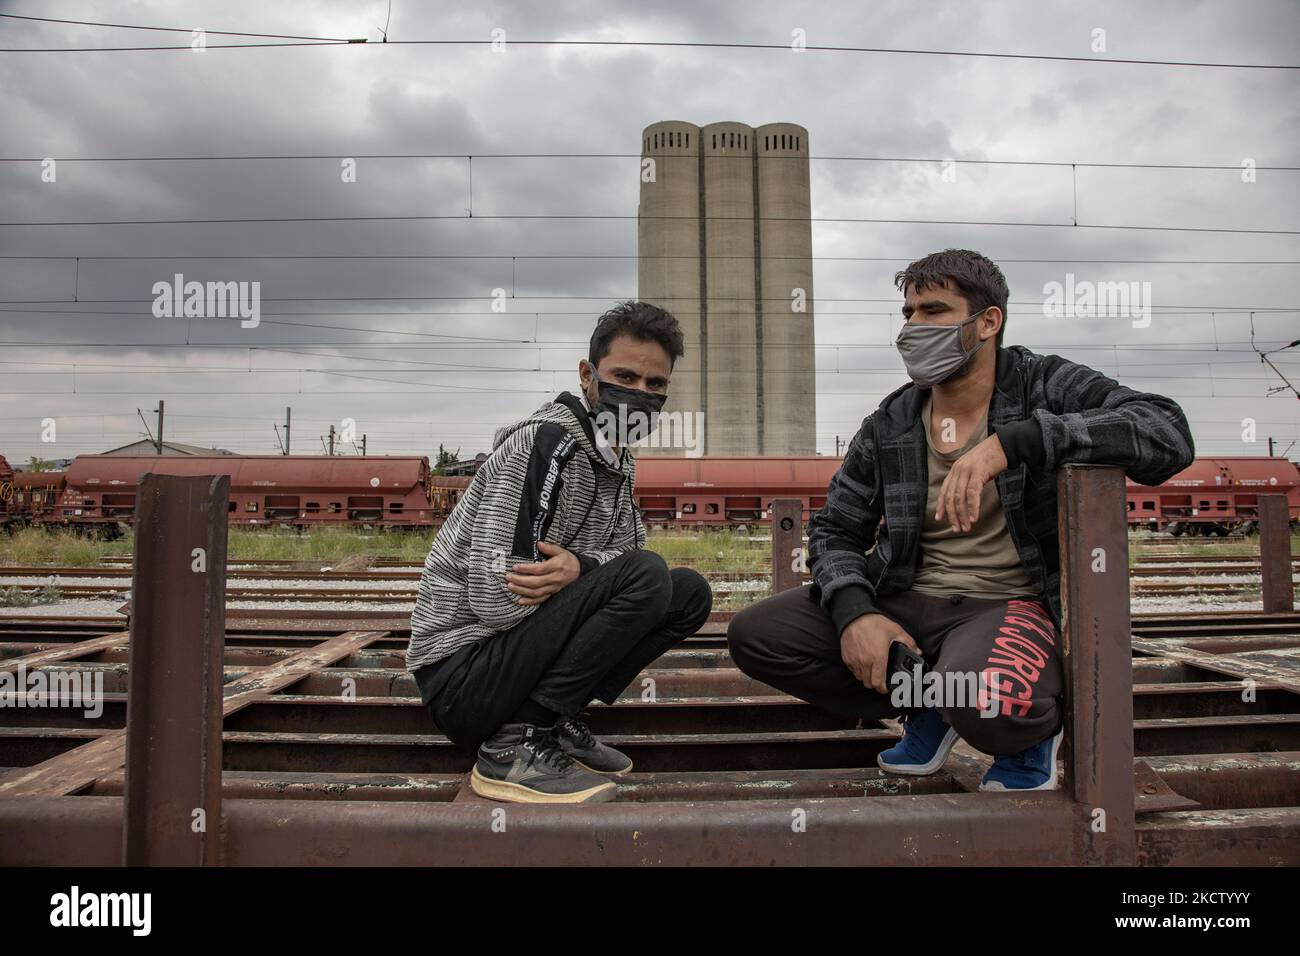 Young men from Afghanistan as seen on the old carriages waiting for the train. Refugees and migrants are seen at the railway junction and the old abandoned train carriages living and sleeping temporarily in Dialogi near Thessaloniki. Asylum seekers mostly from Afghanistan are waiting for cargo trains to jump on and travel towards Idomeni that leads to Northern Macedonia and Serbia, following the Balkan Route to Europe. Most of them walked from Turkey towards Greece or some used smugglers with cars. Thessaloniki Greece on November 6, 2021 (Photo by Nicolas Economou/NurPhoto) Stock Photo